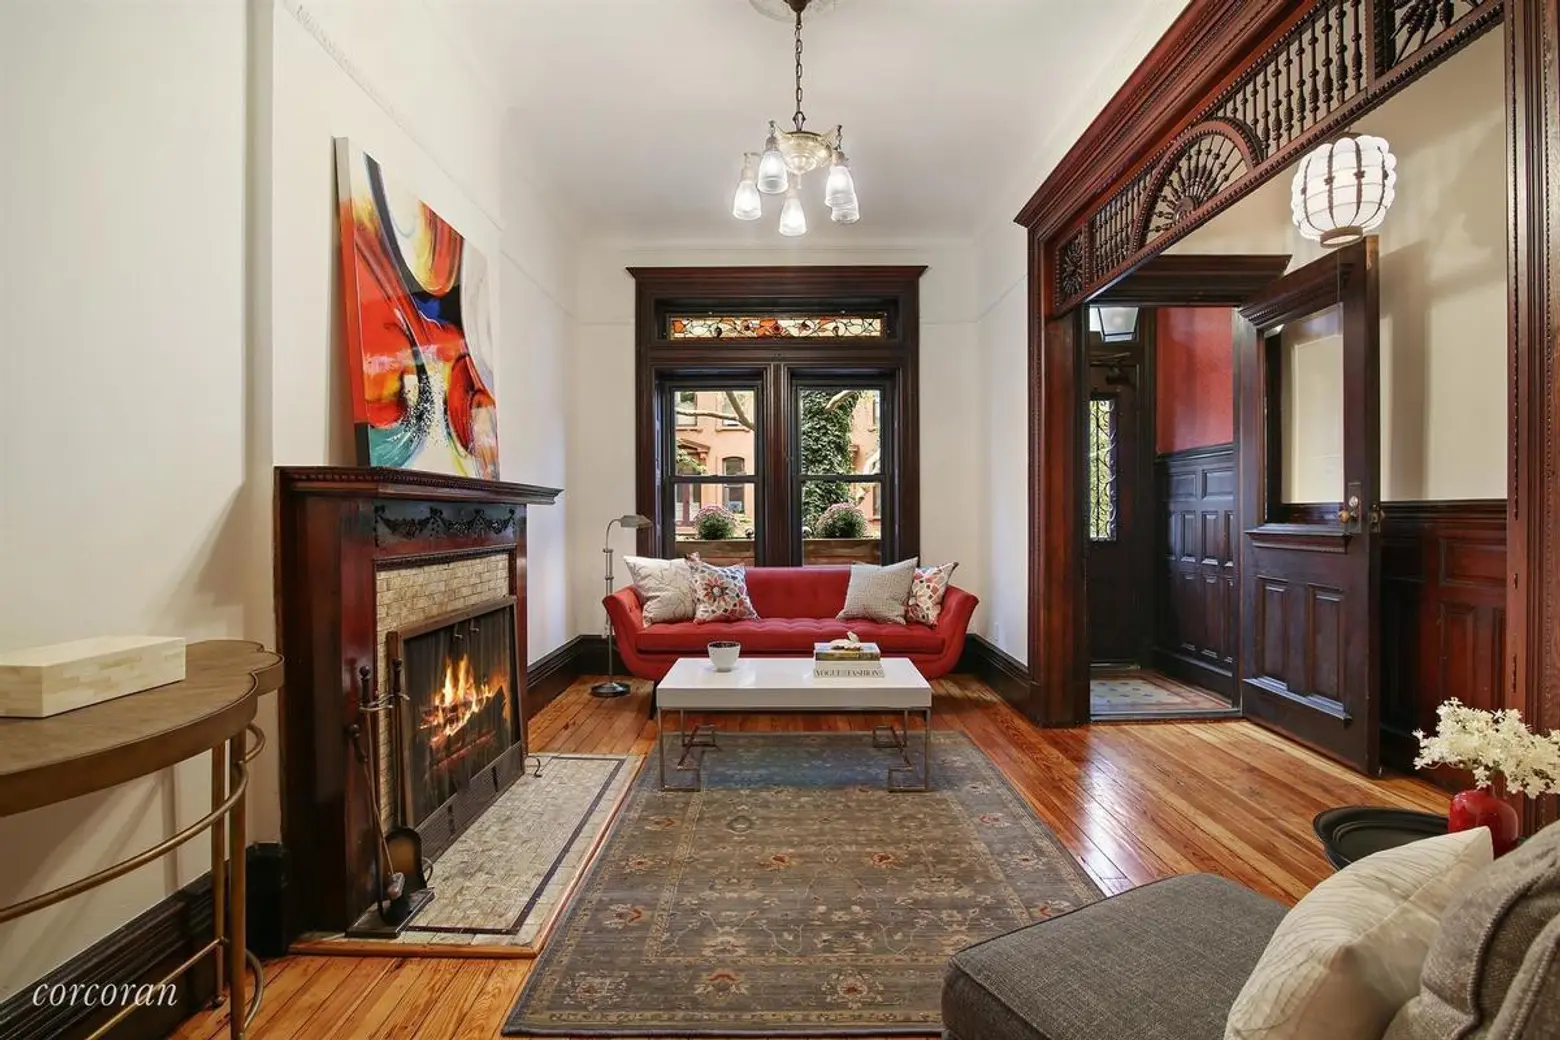 Historic beauty shines through lush design in this $3.5M Prospect Heights Neo-Gothic townhouse